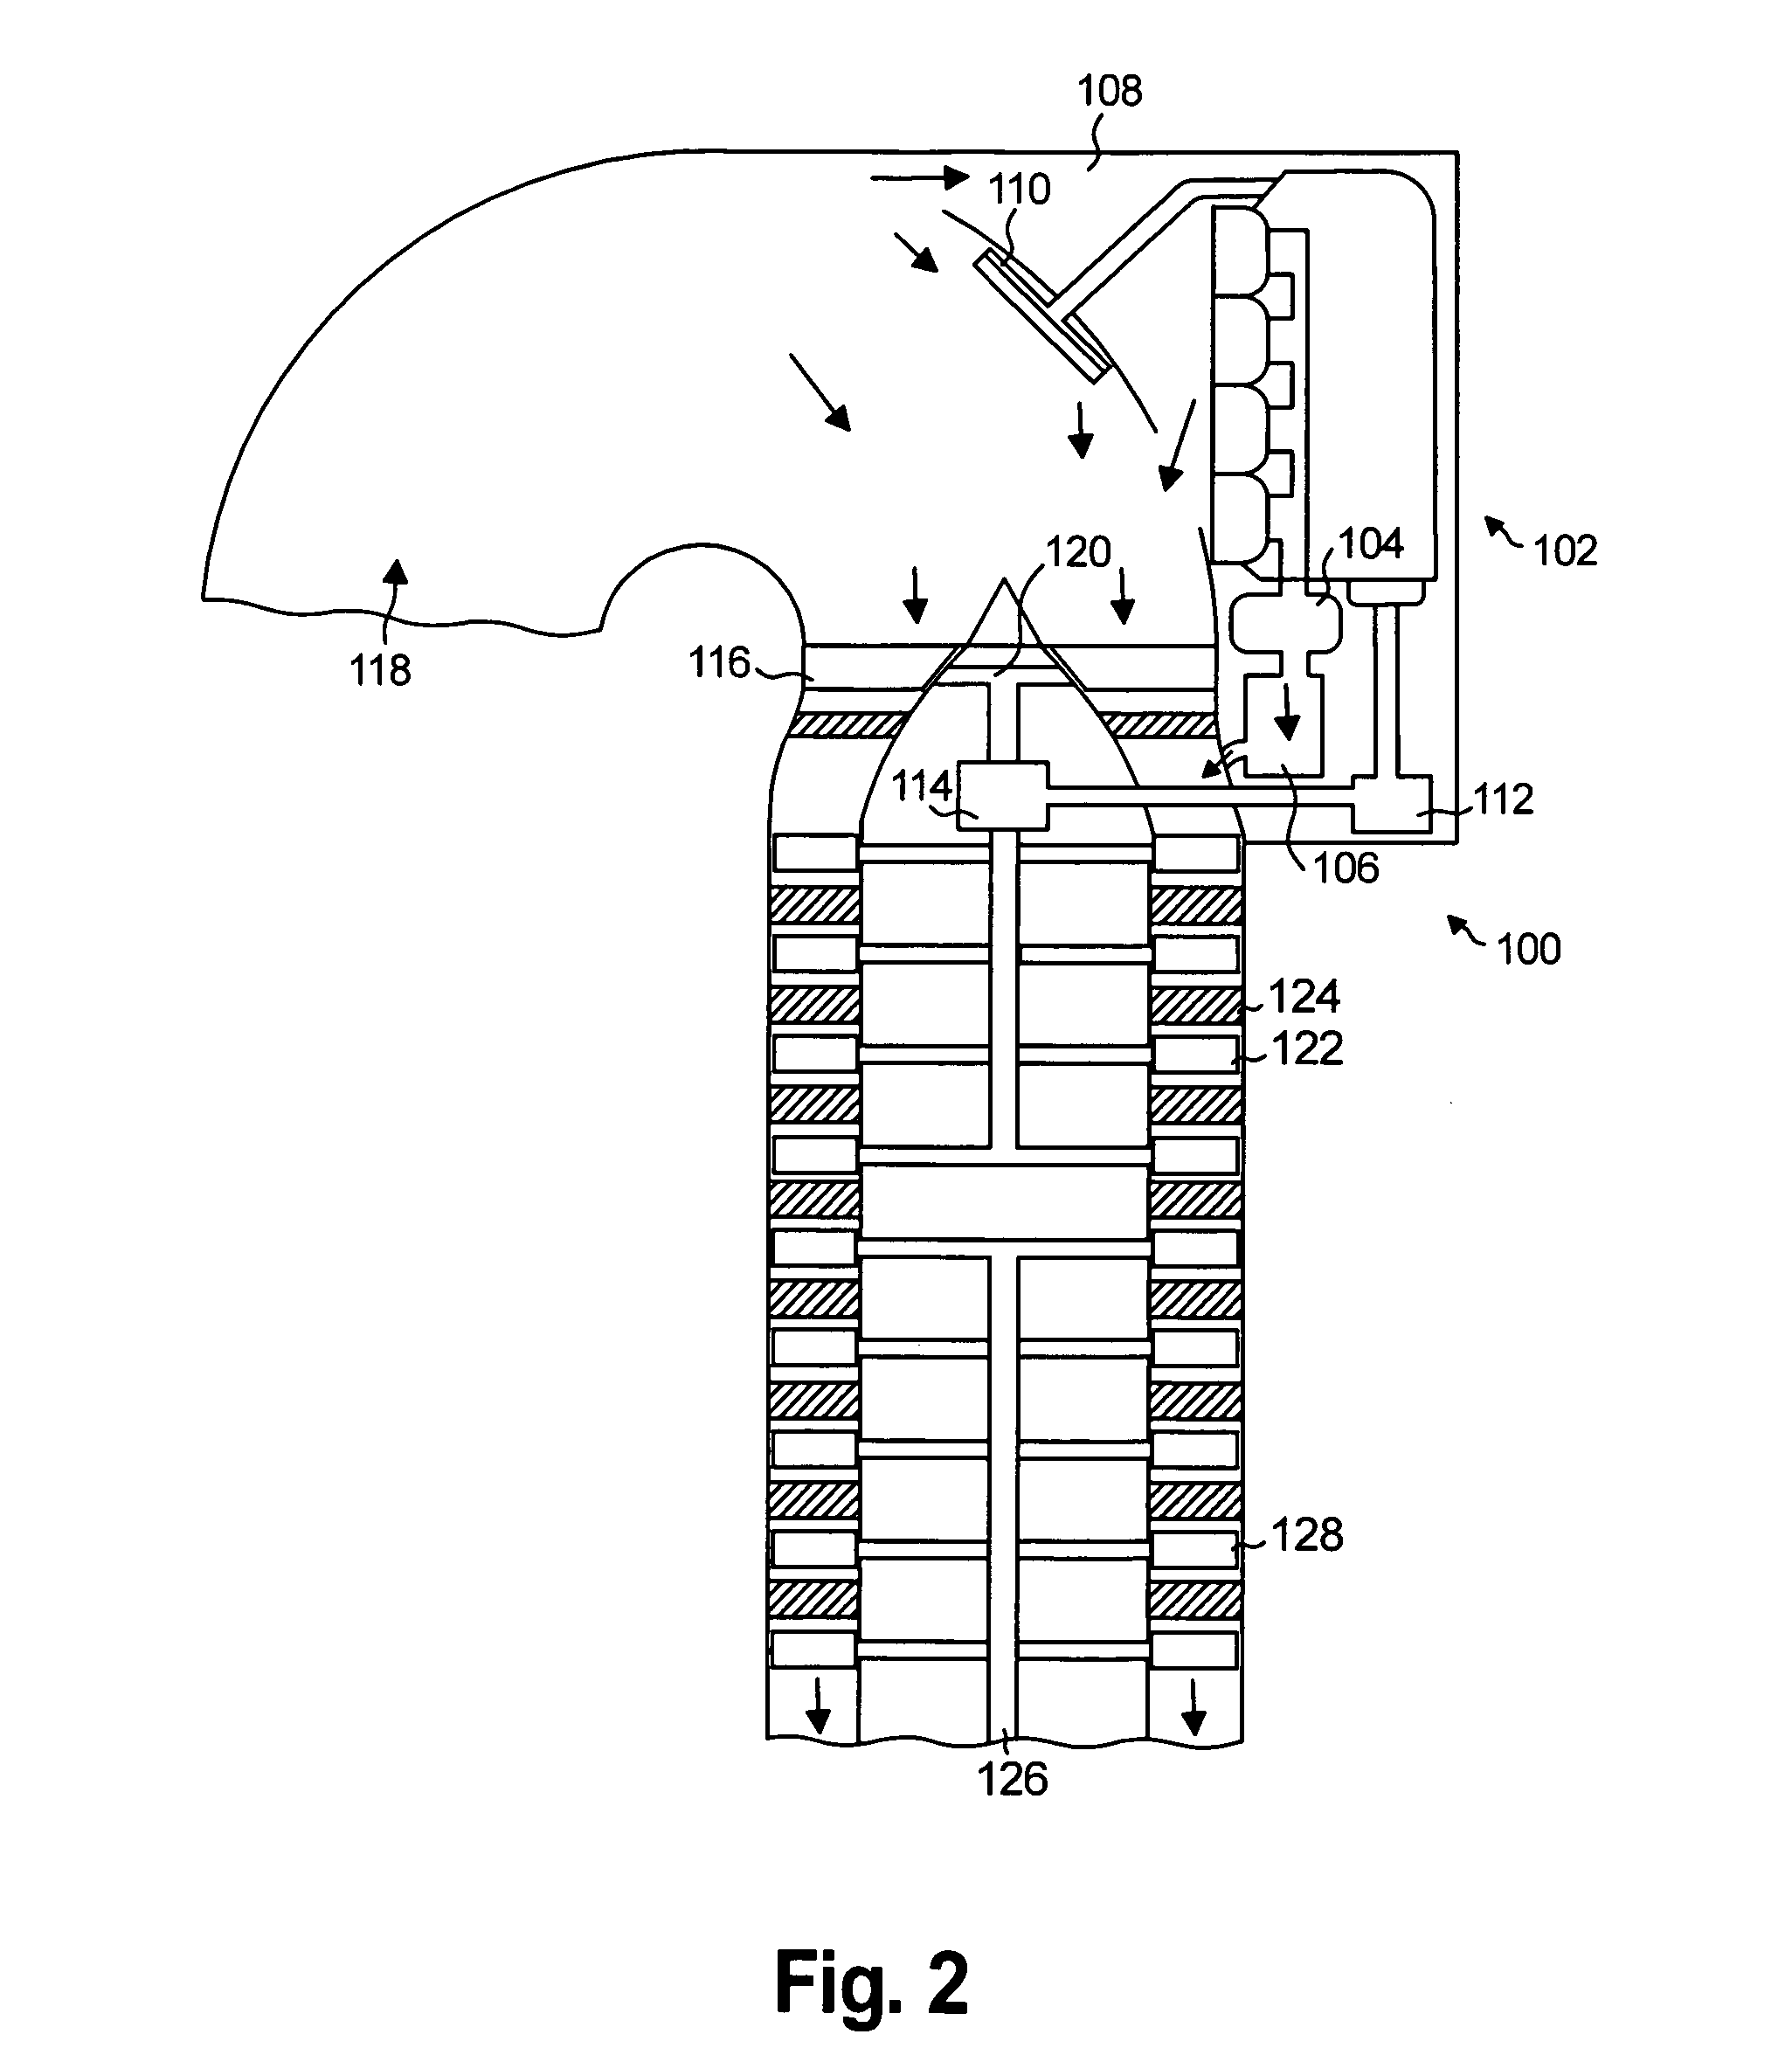 Hybrid air turbine engine with heat recapture system for moving vehicle